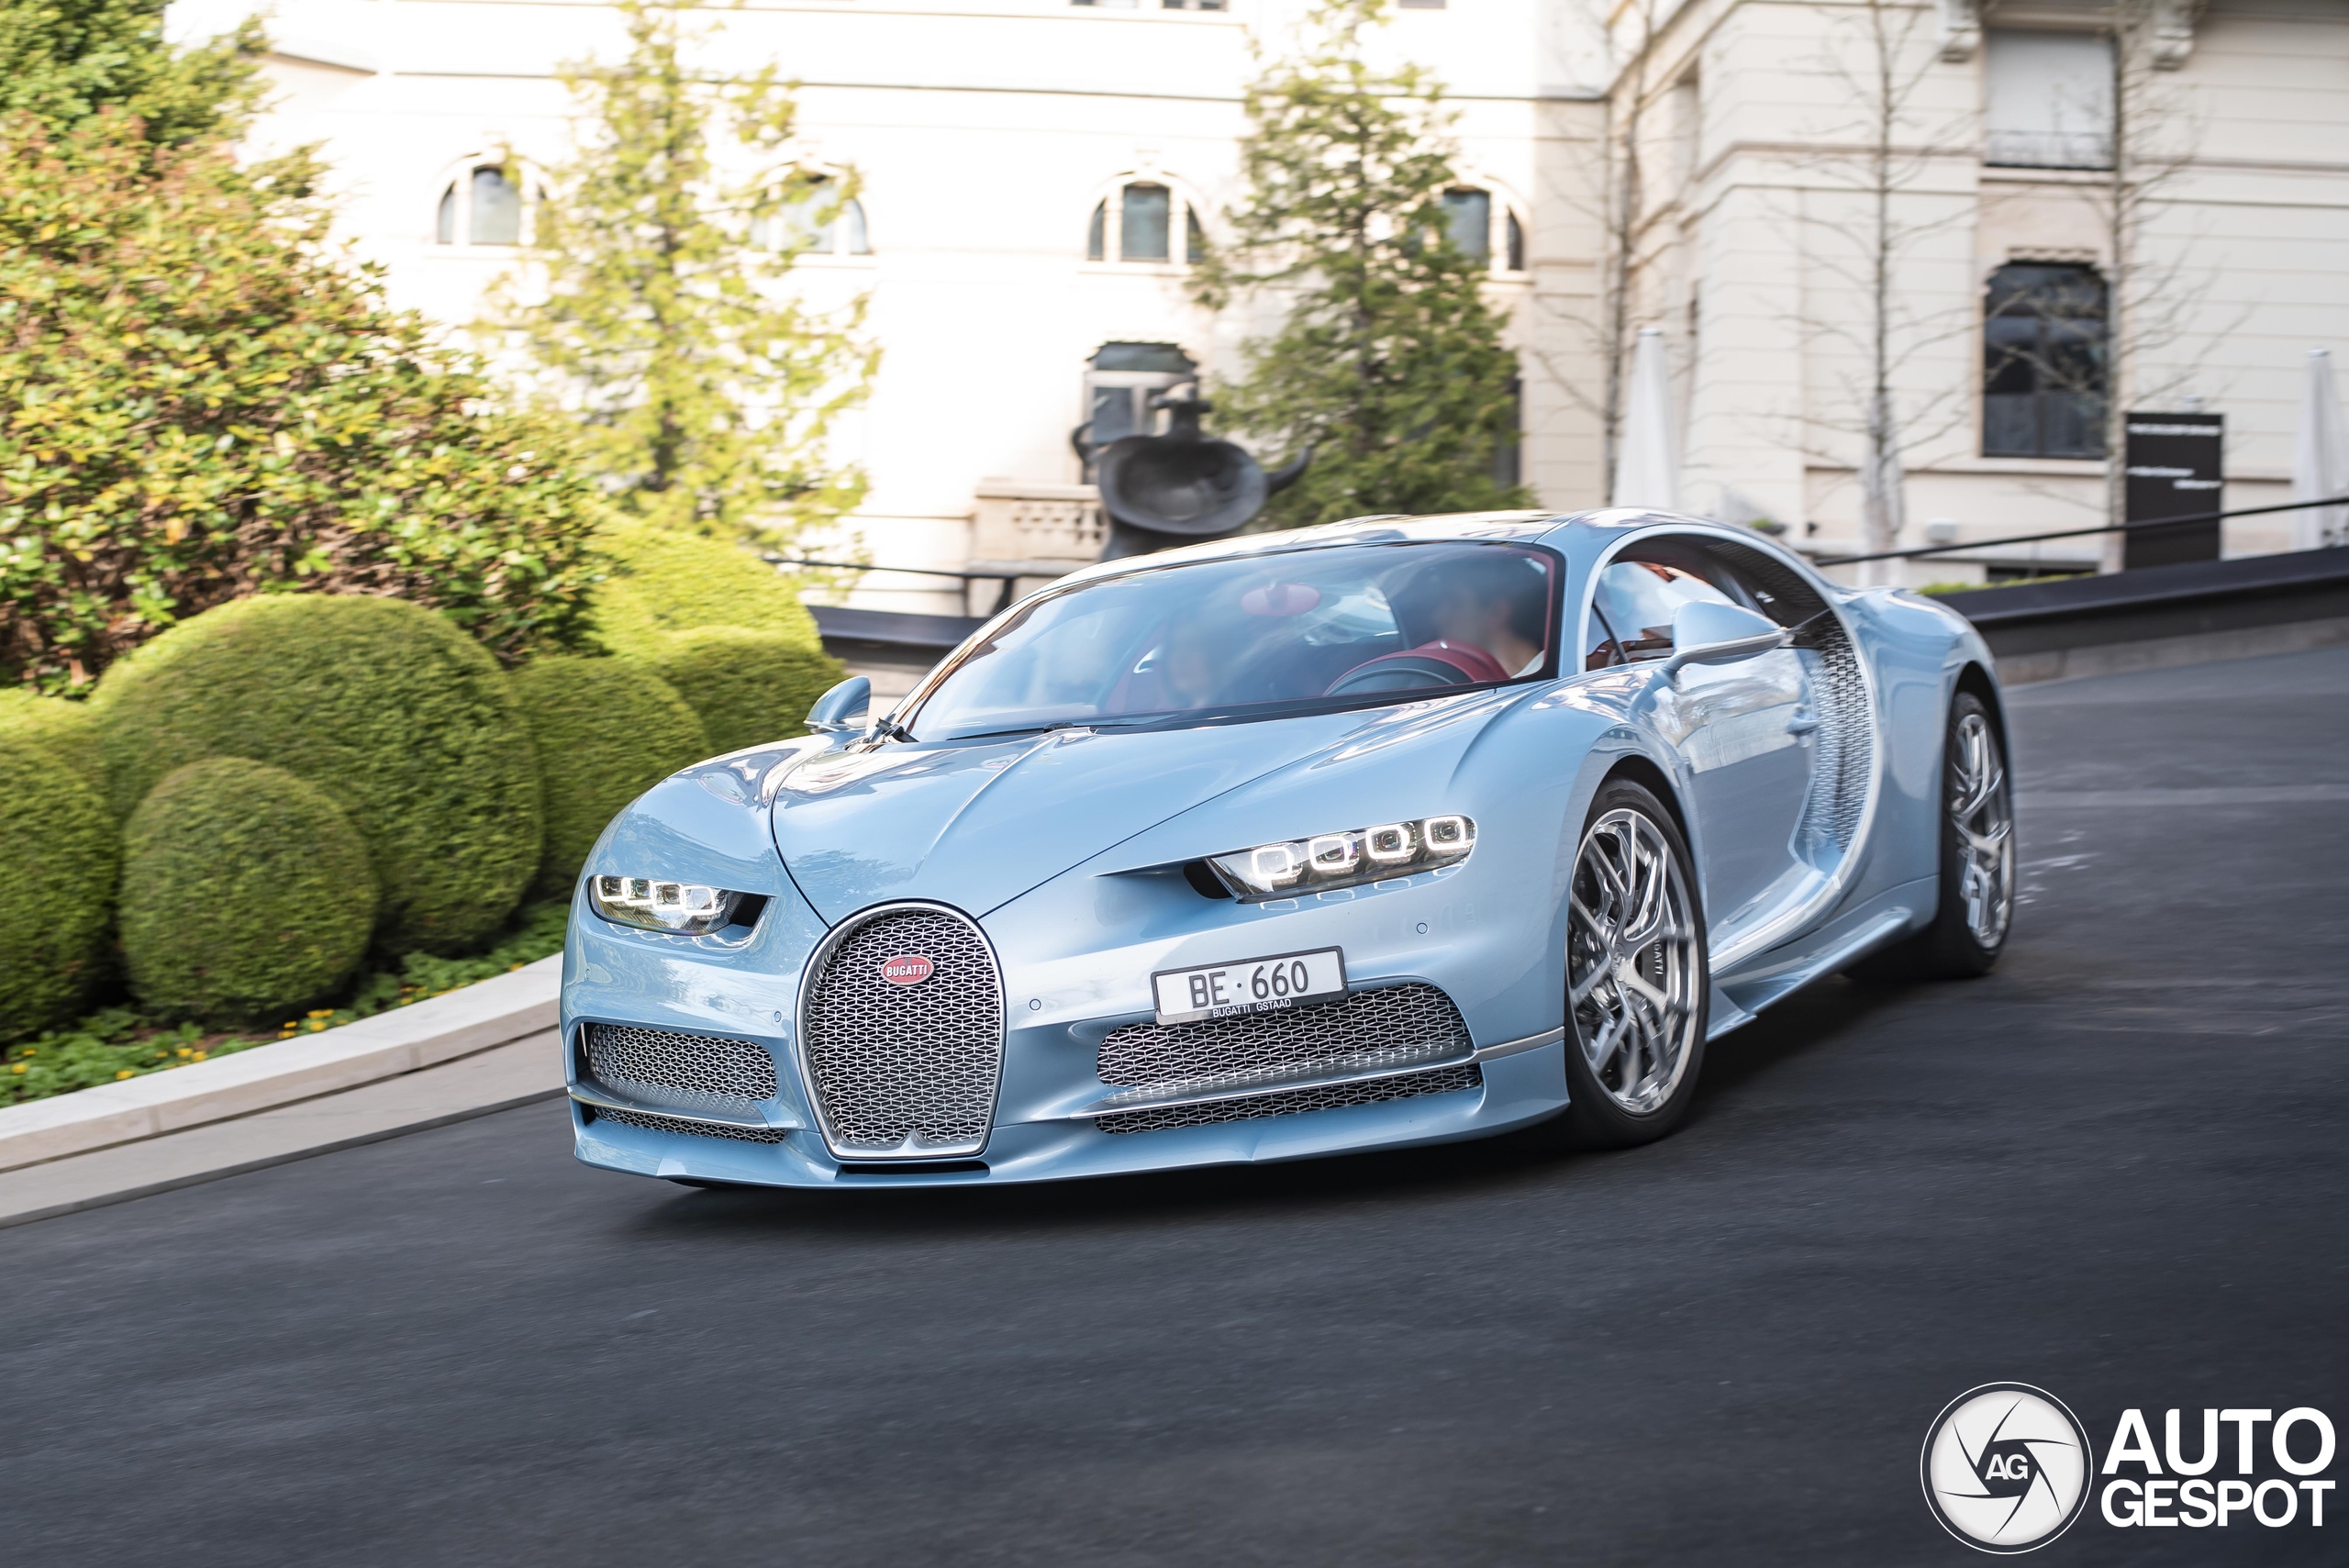 A magnificent Chiron shows up in Zurich